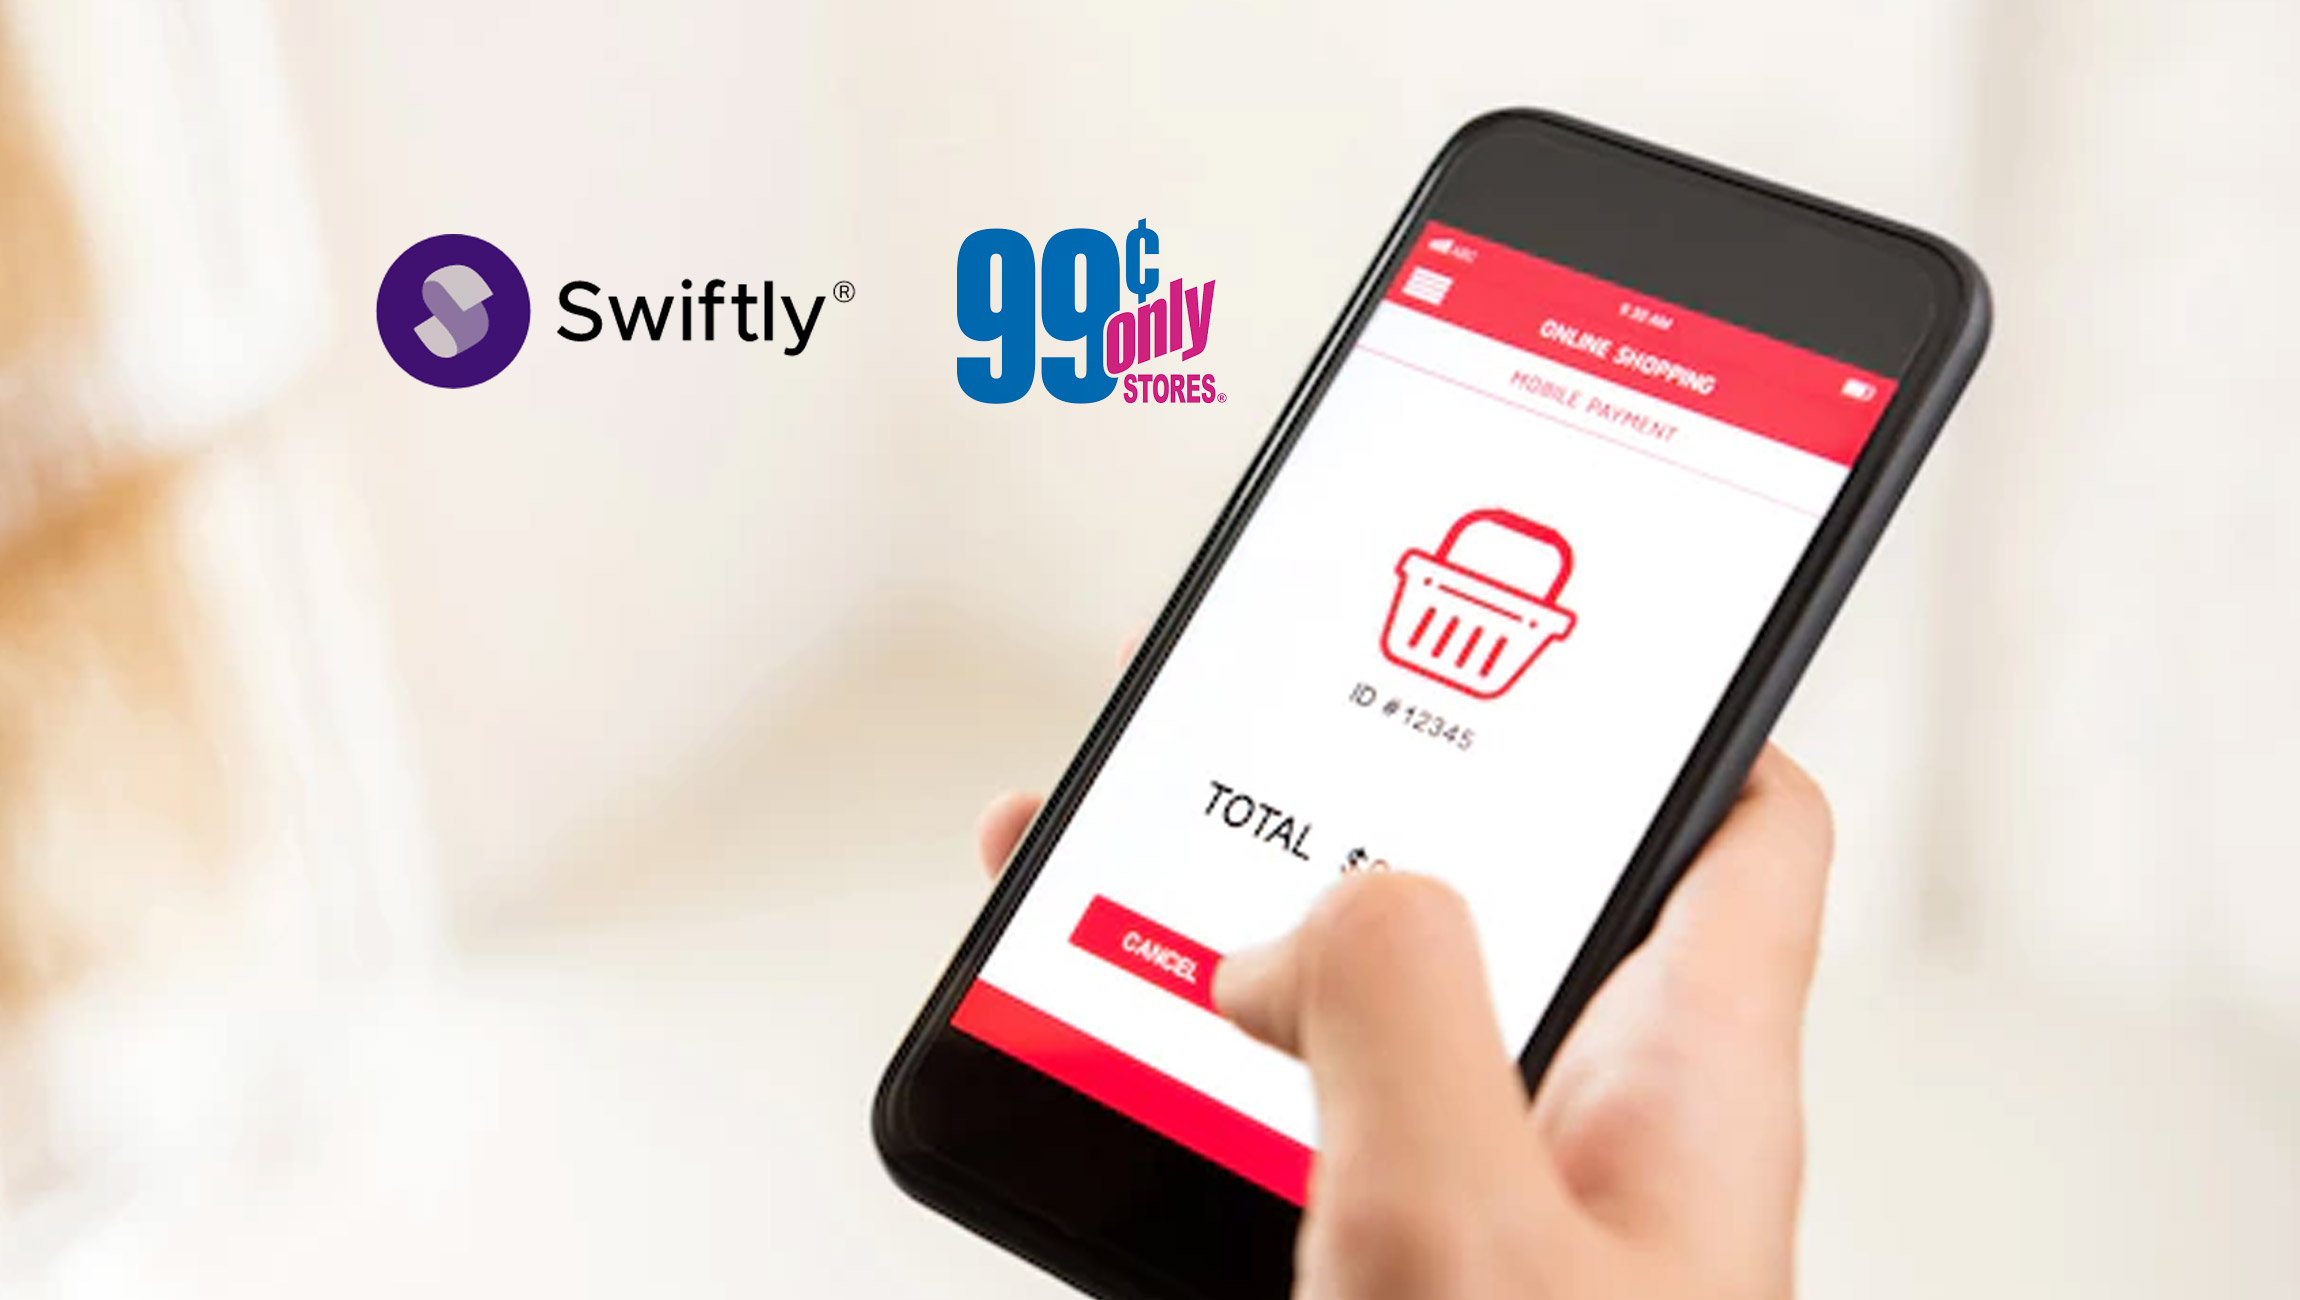 99 Cents Only Stores Teams Up with Swiftly to Provide Personalized Mobile Shopping Experiences